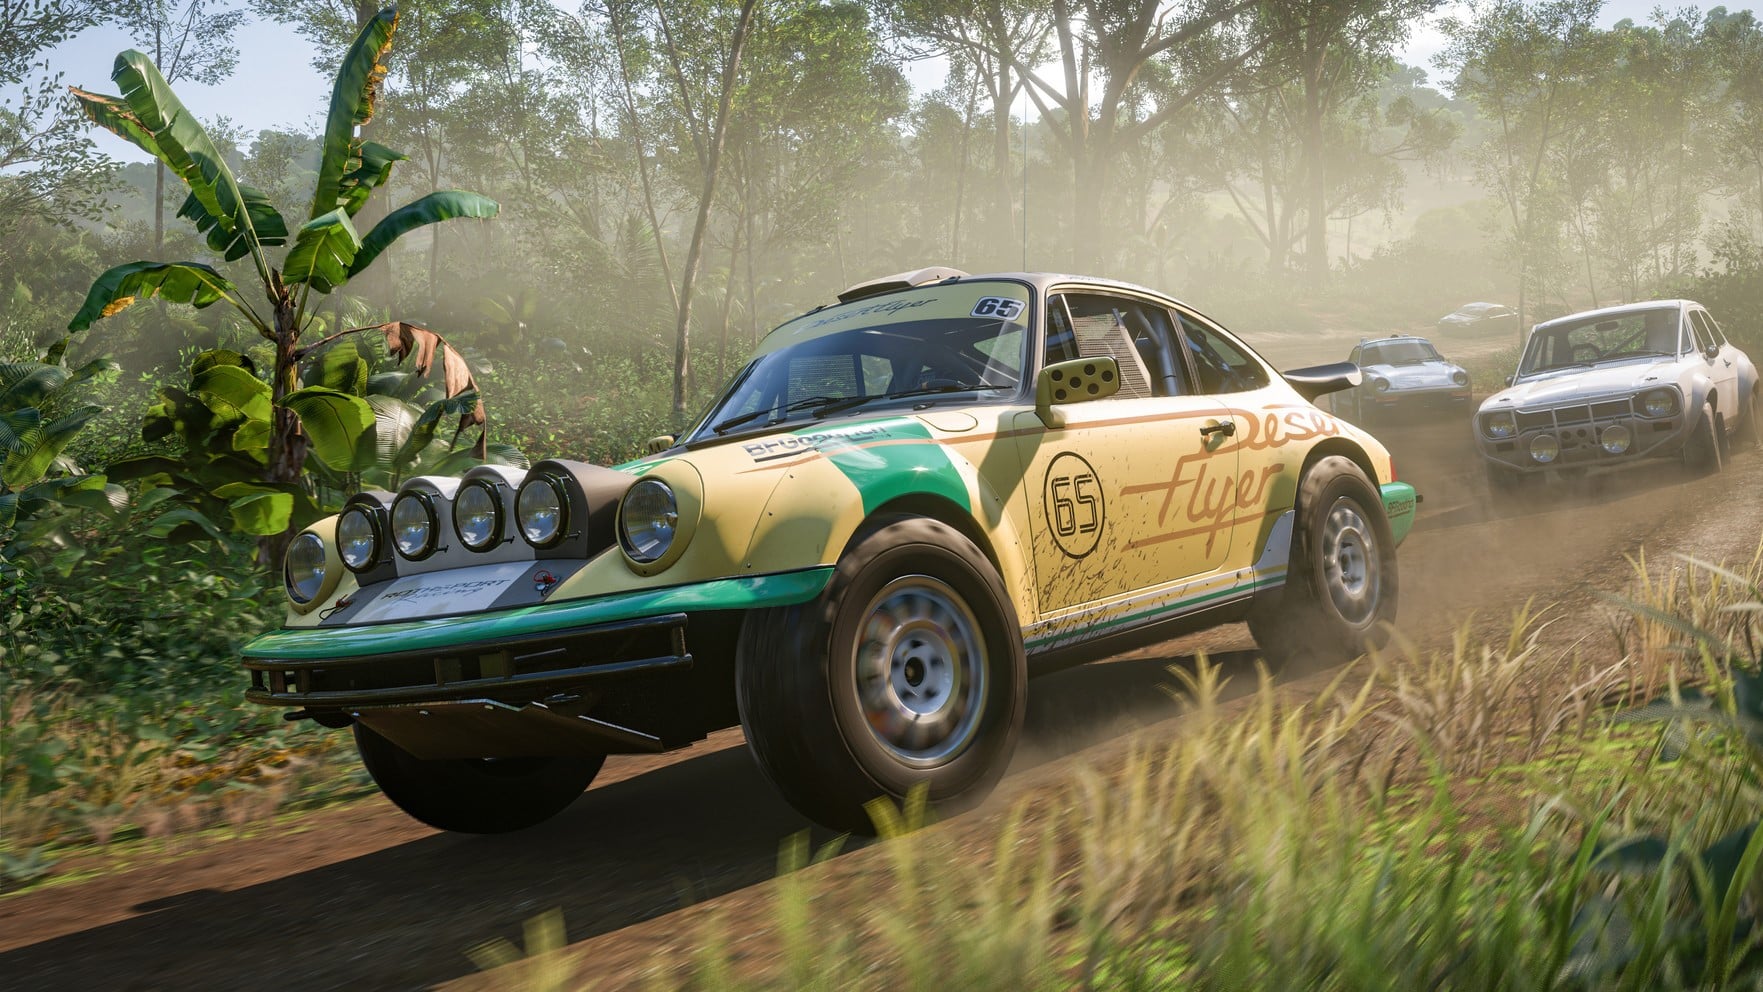 forza horizon 3 soundtrack not going to give it up